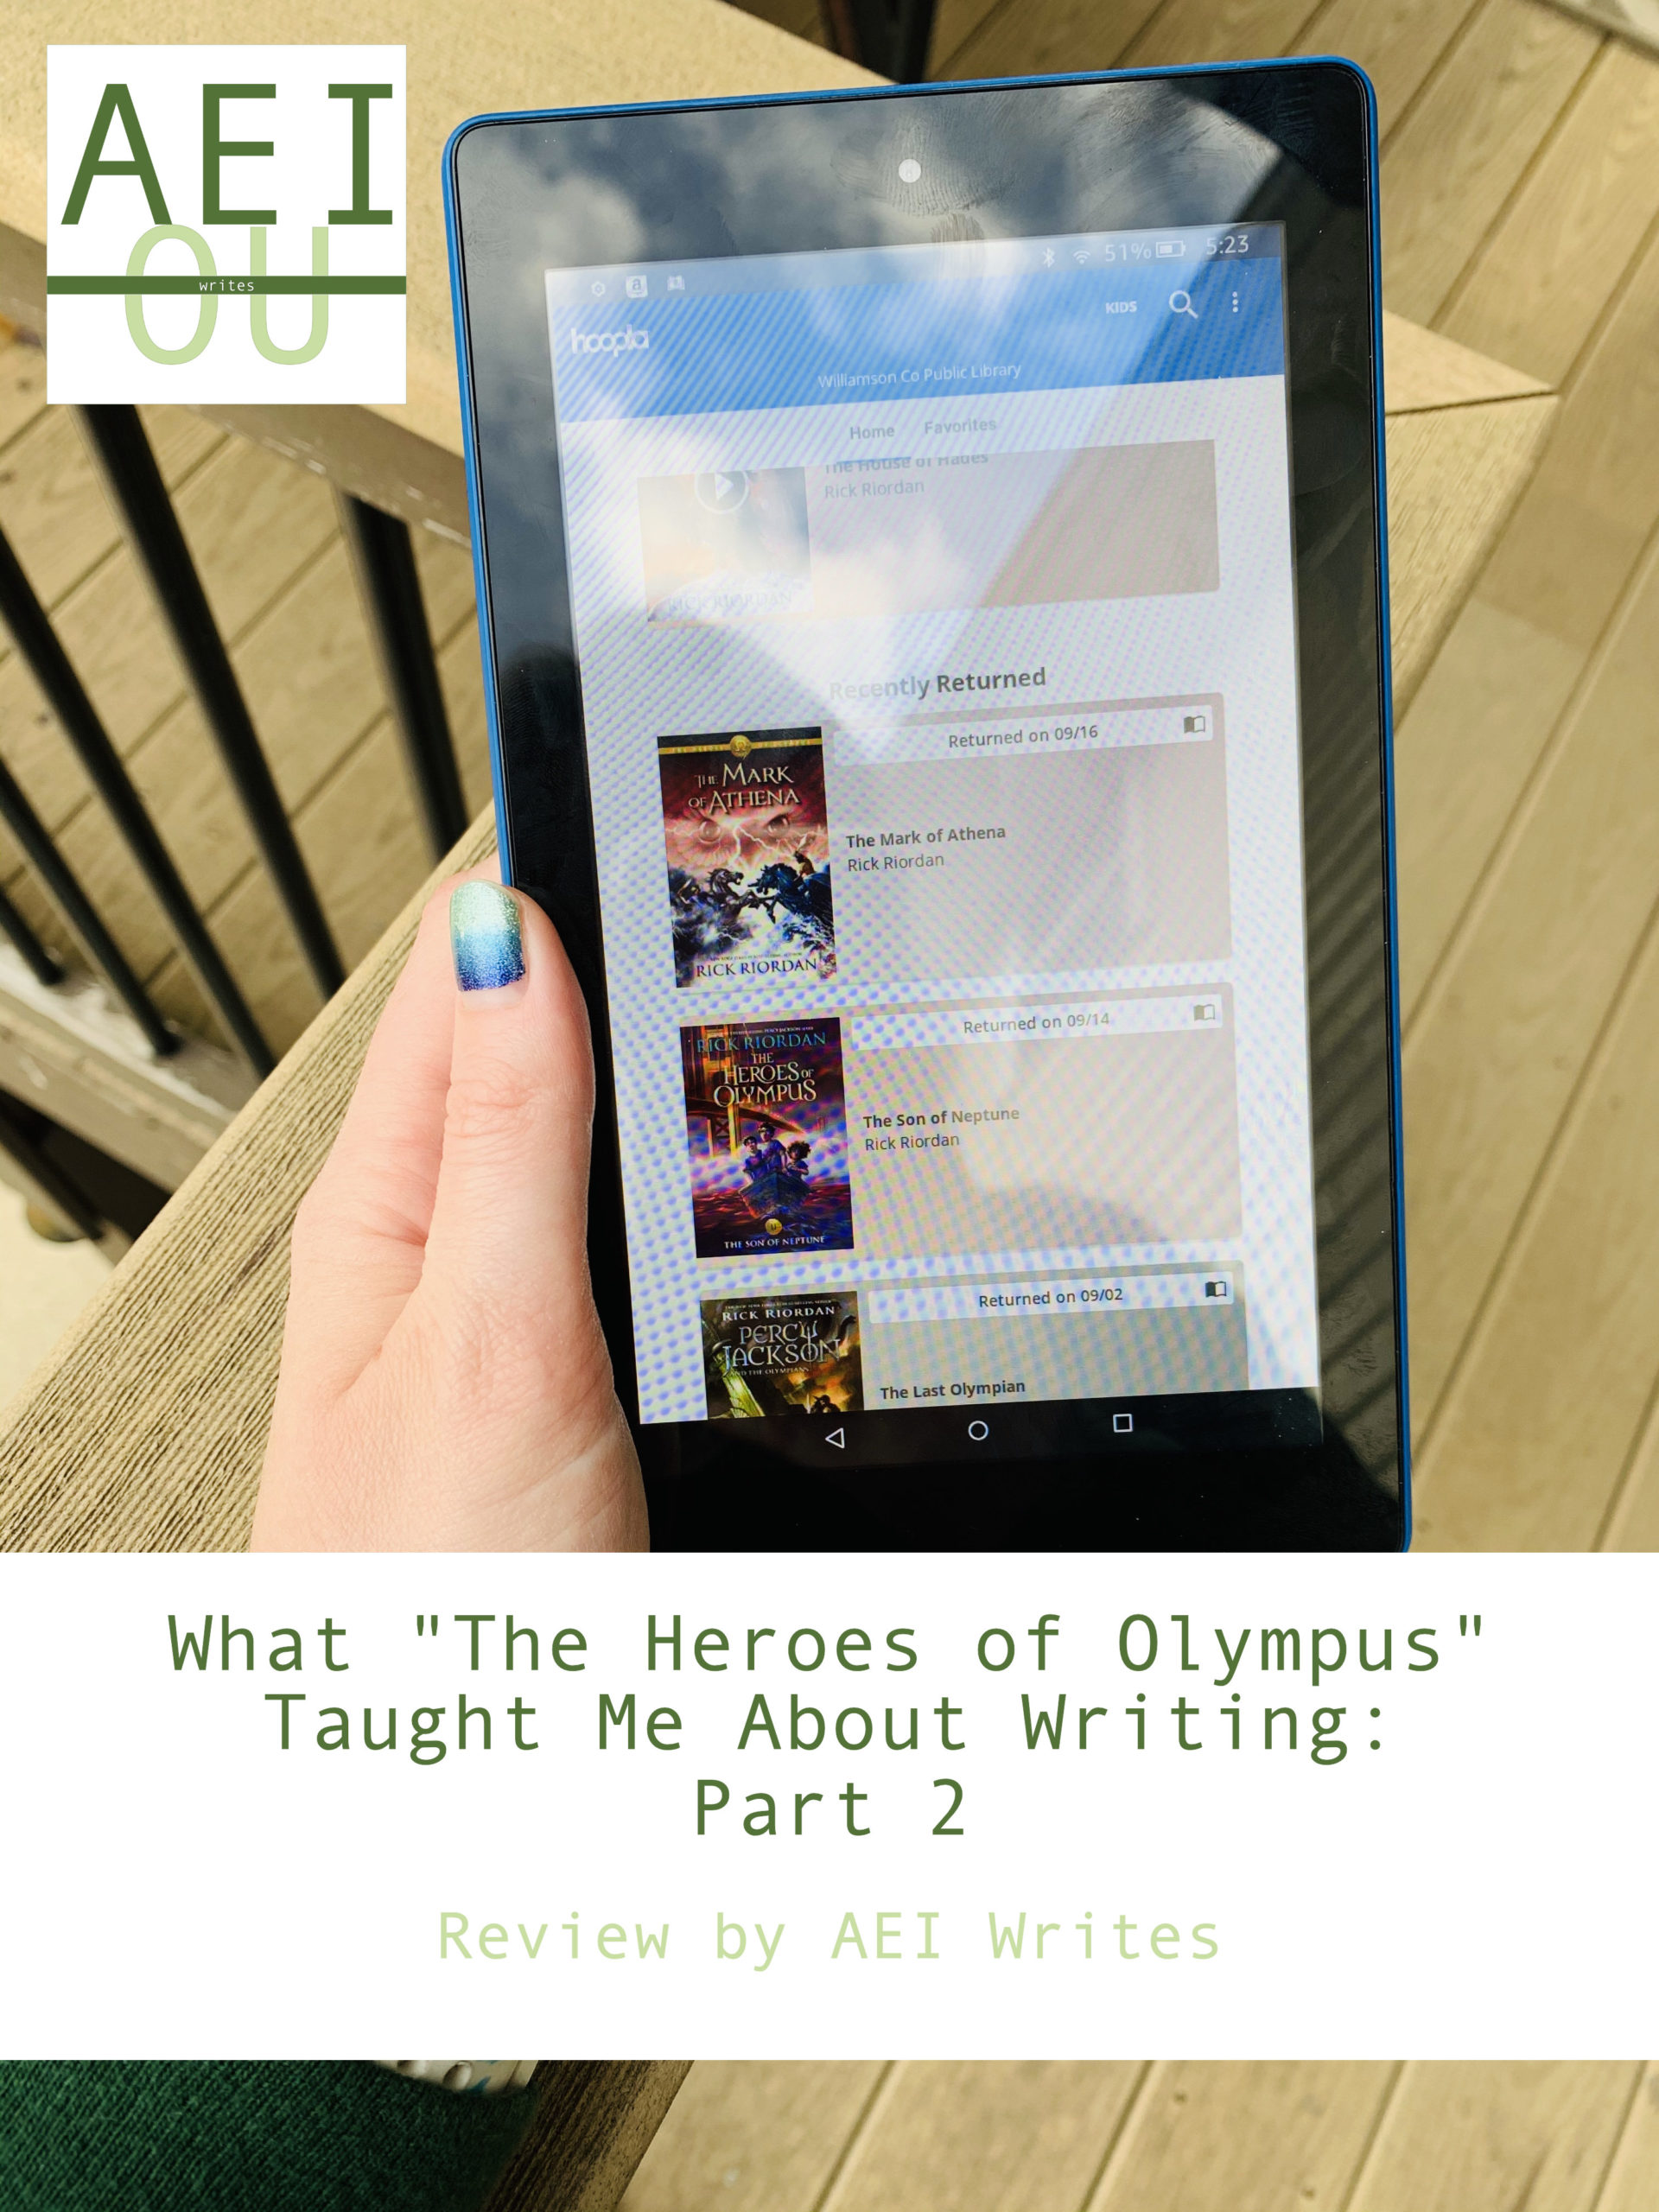 What I Learned from “The Heroes of Olympus”: Part 2